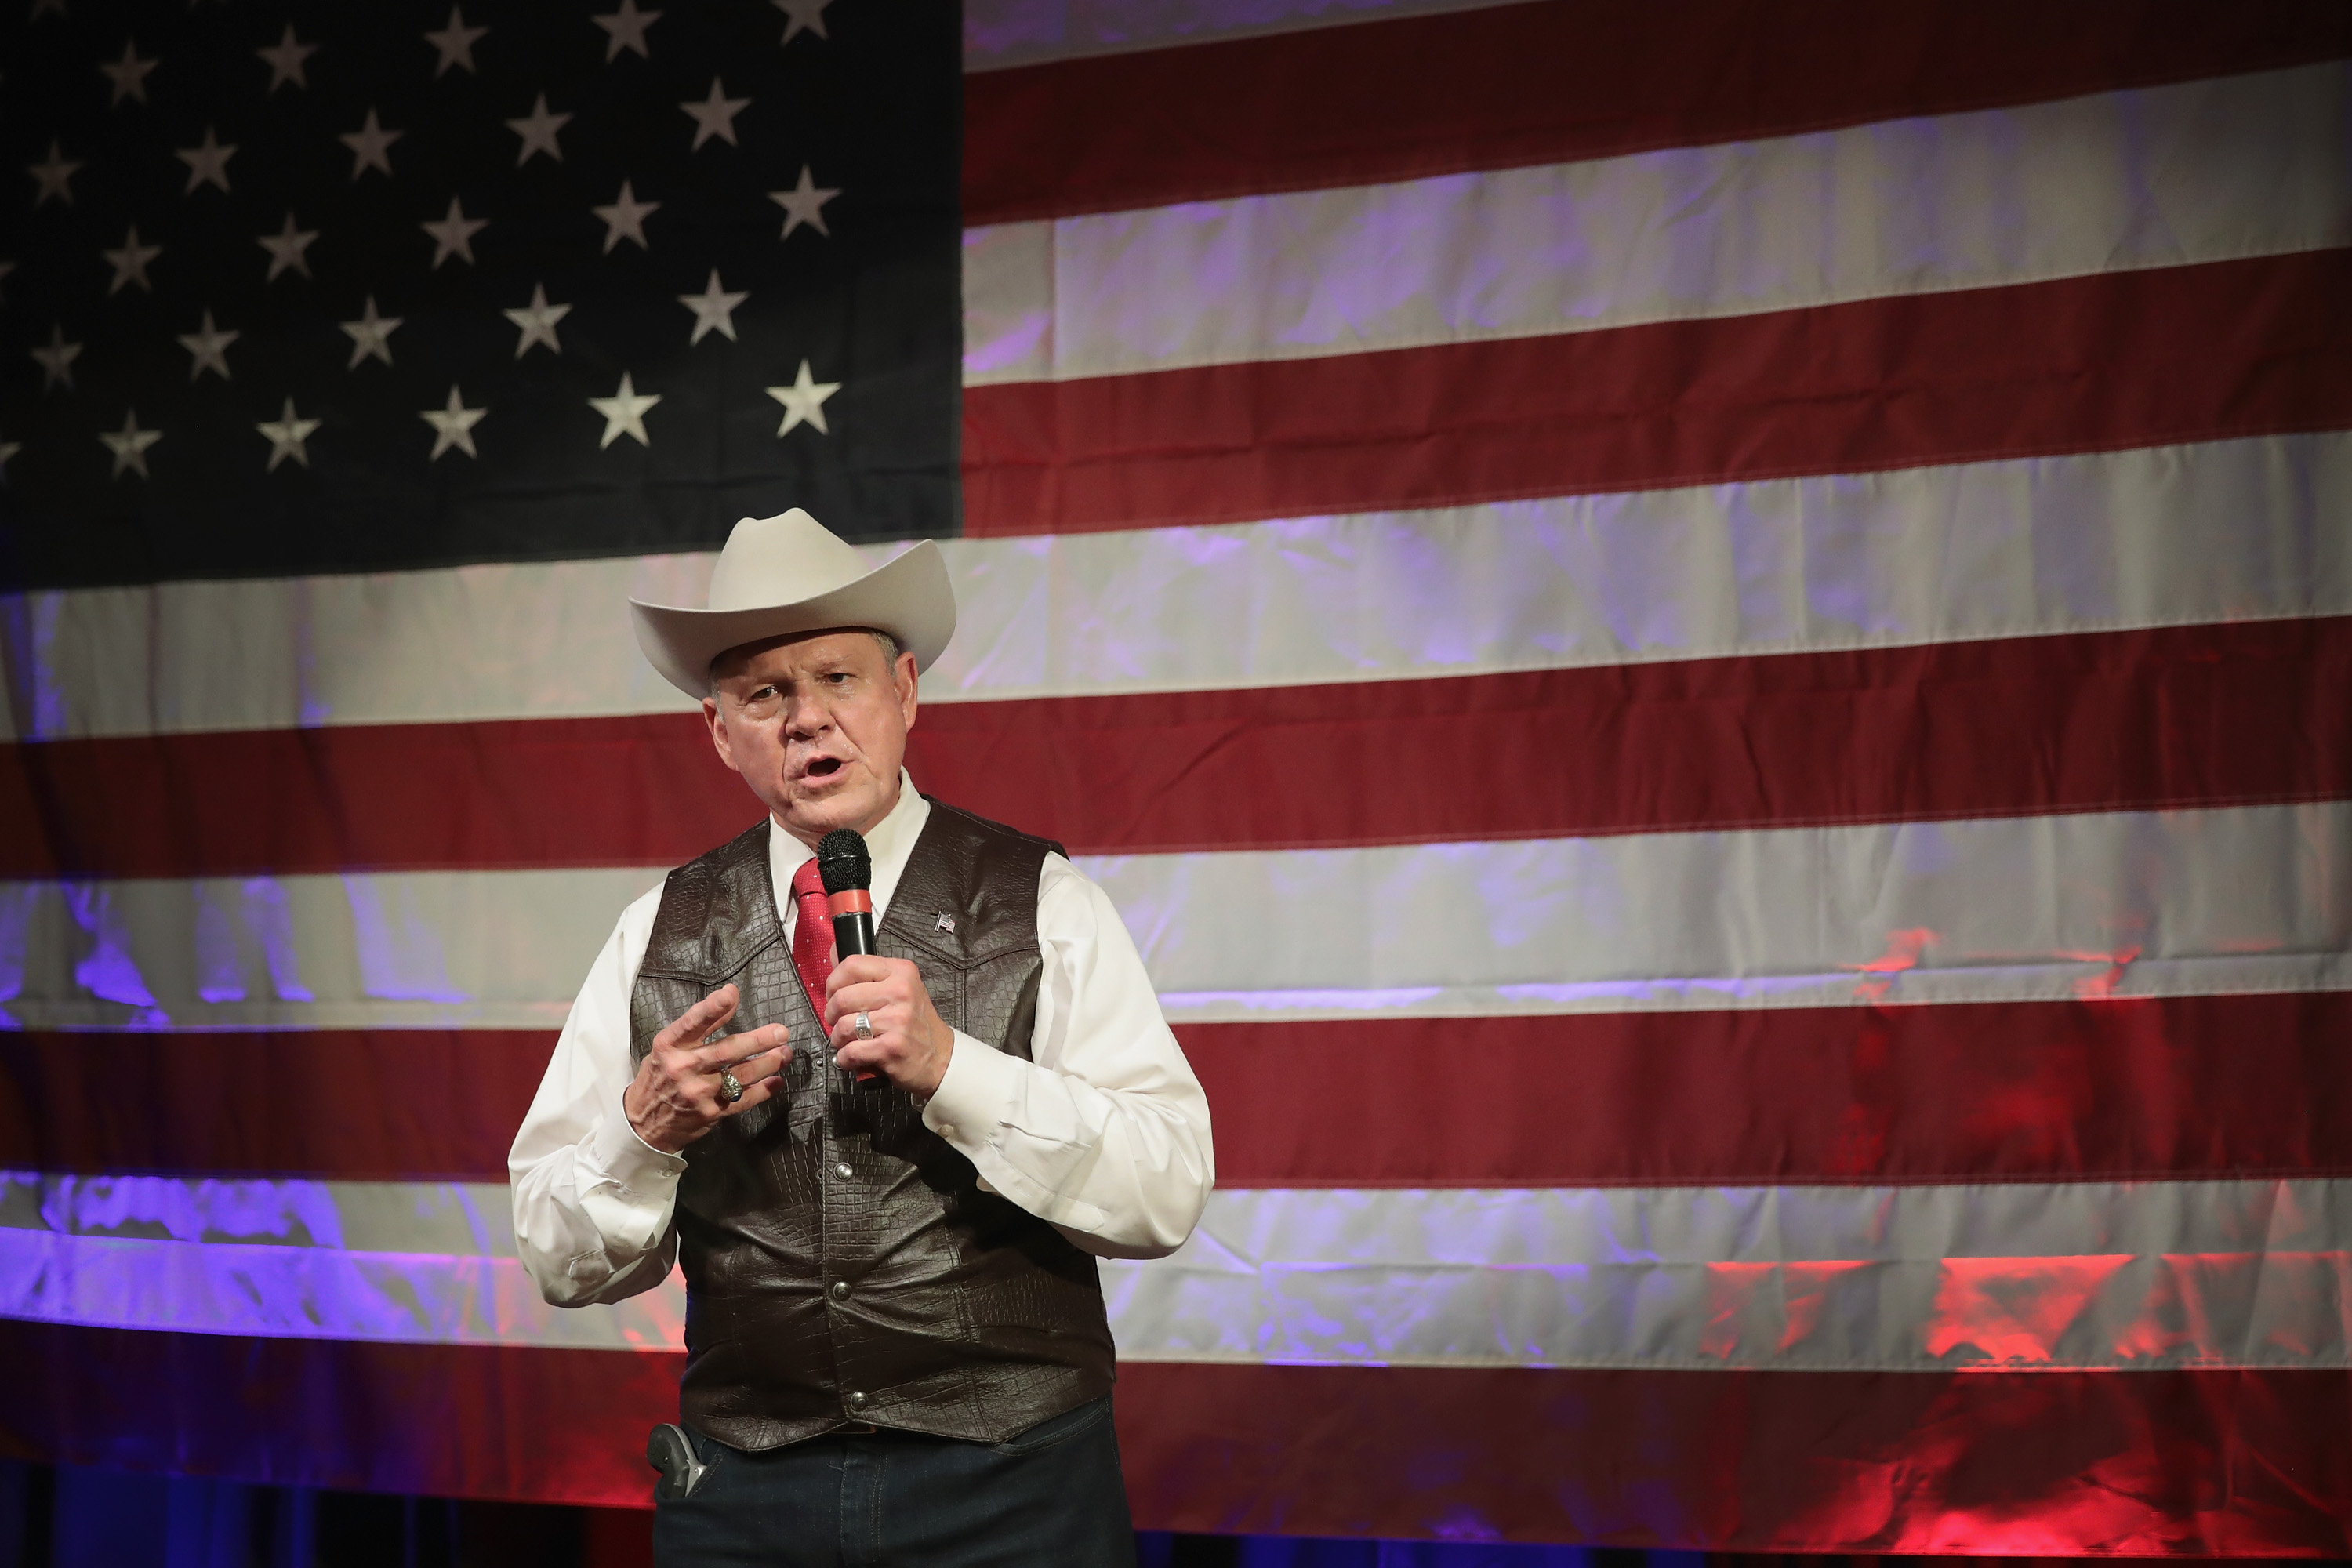 Roy Moore speaks at a campaign rally on September 25, 2017 in Fairhope, Ala. (Scott Olson—Getty Images)